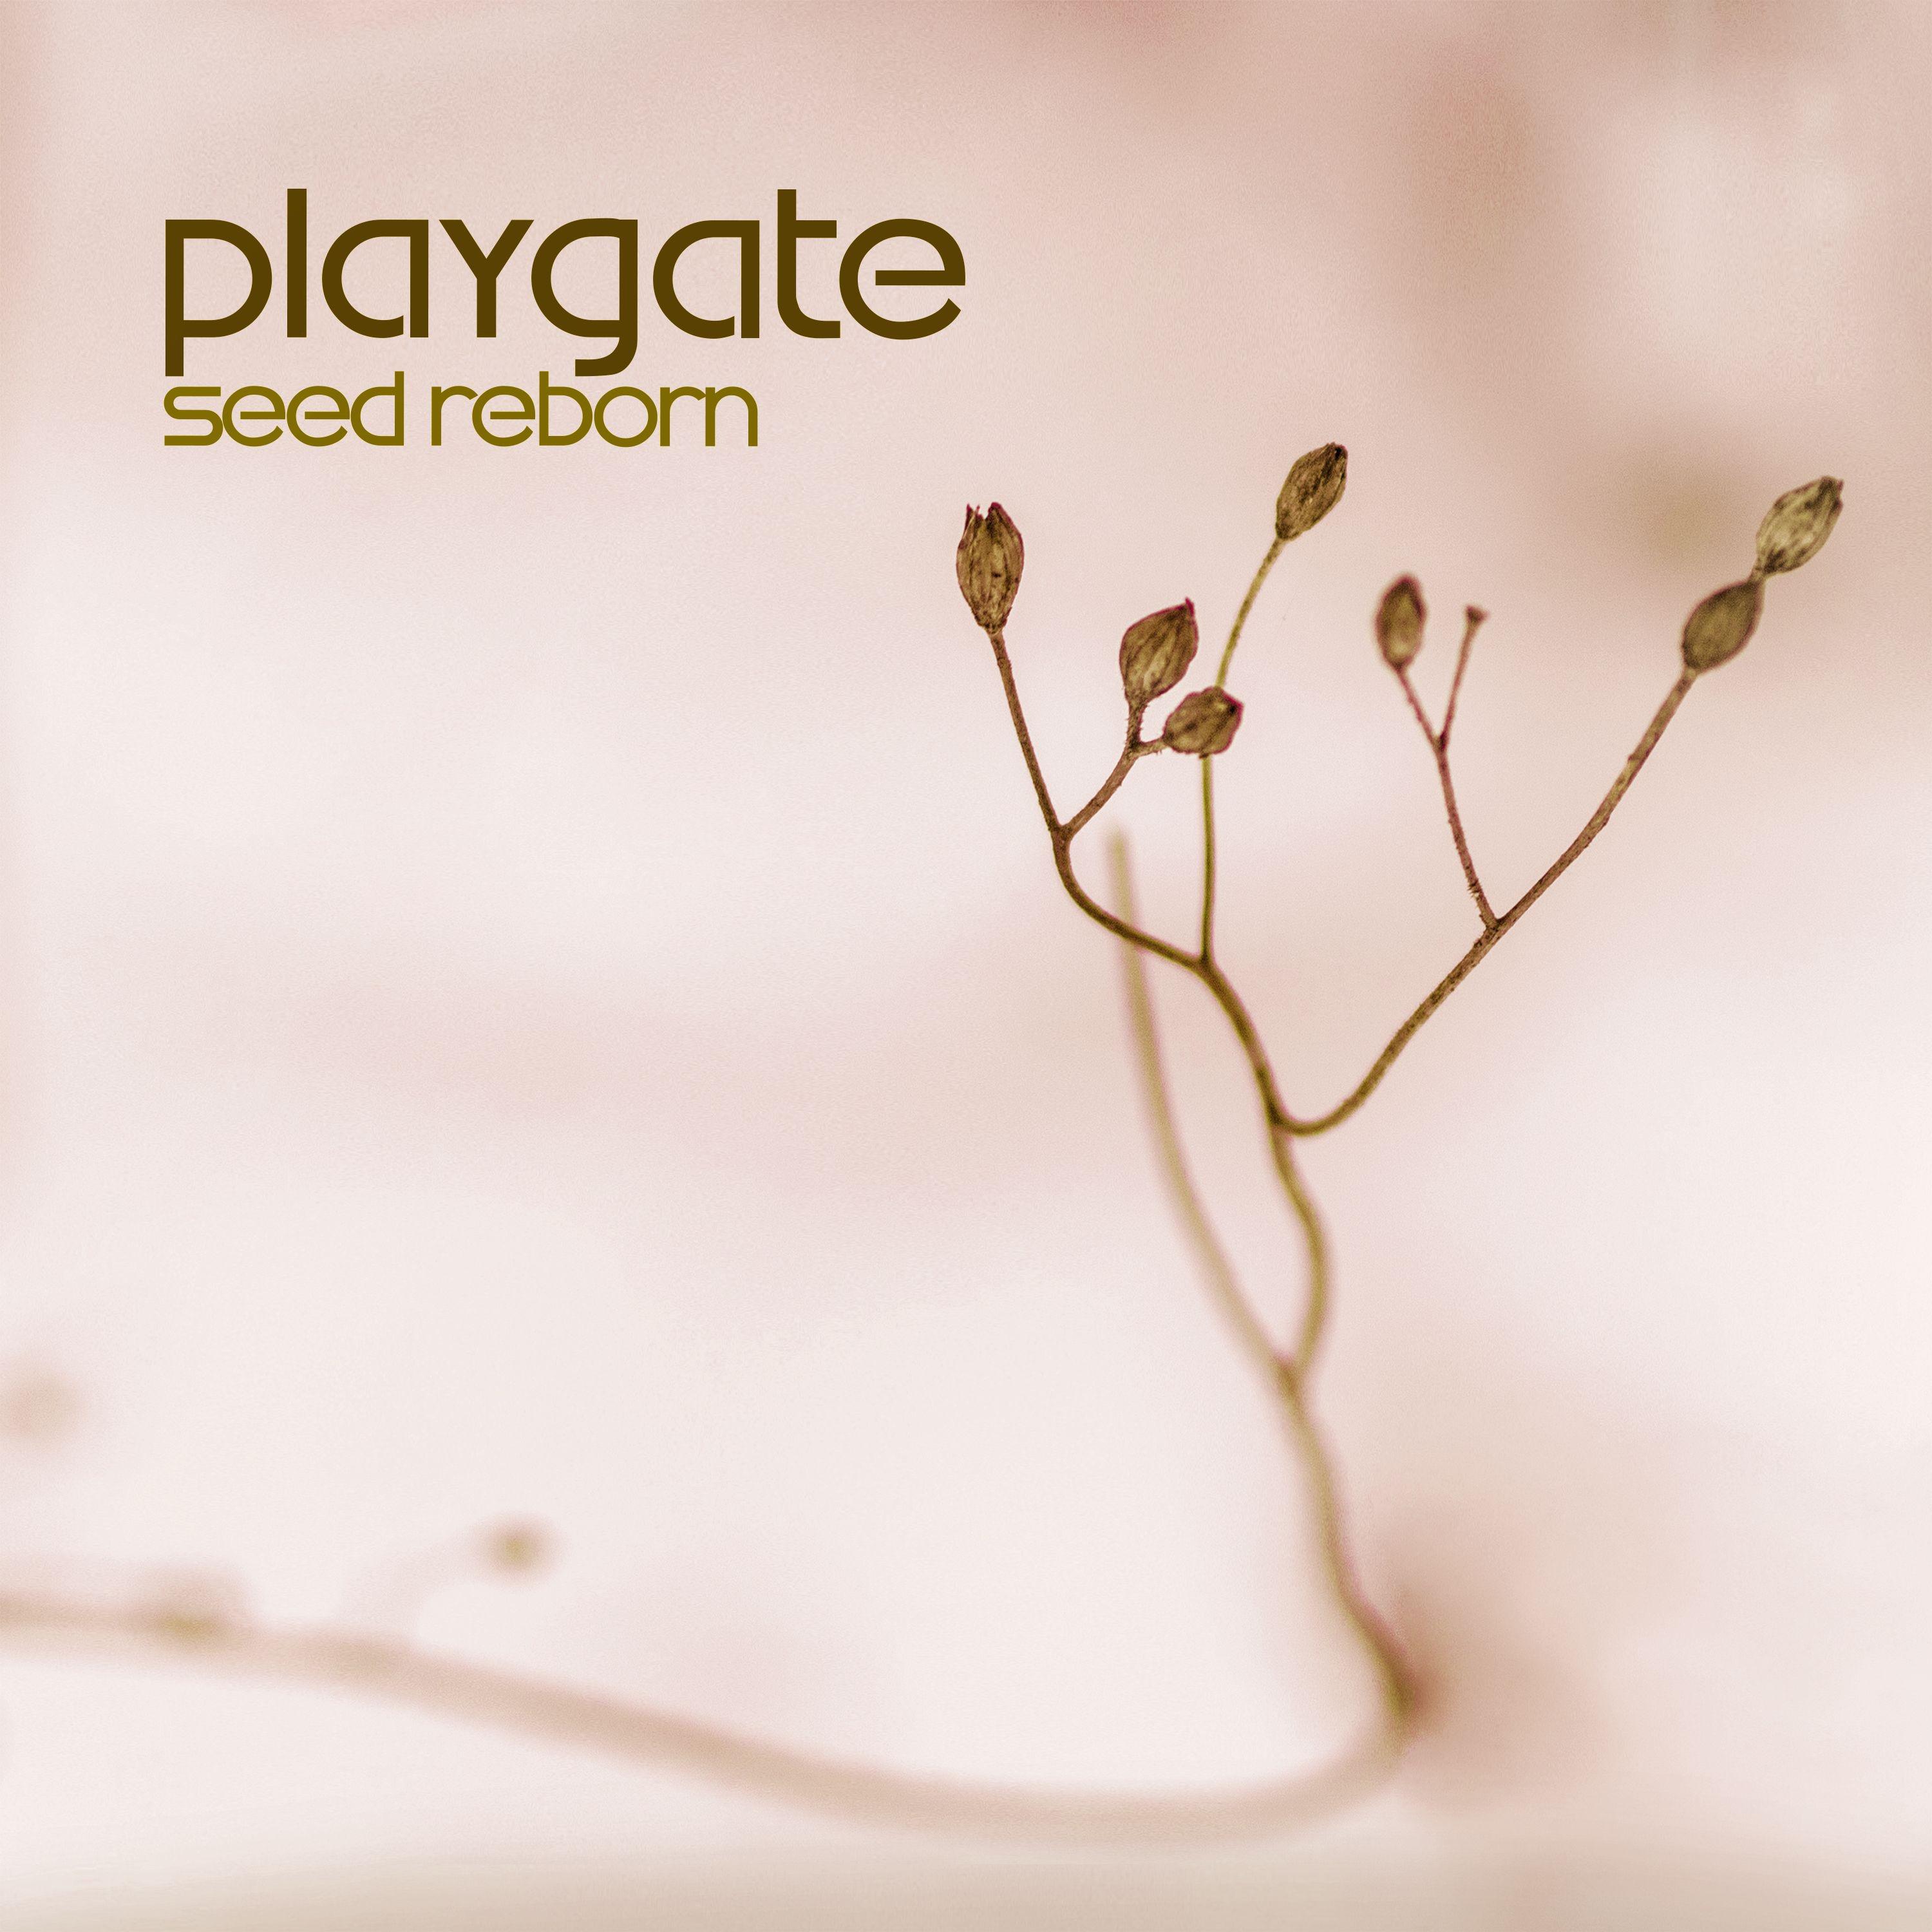 Playgate - Reckless Dome (Rebuild Mix)